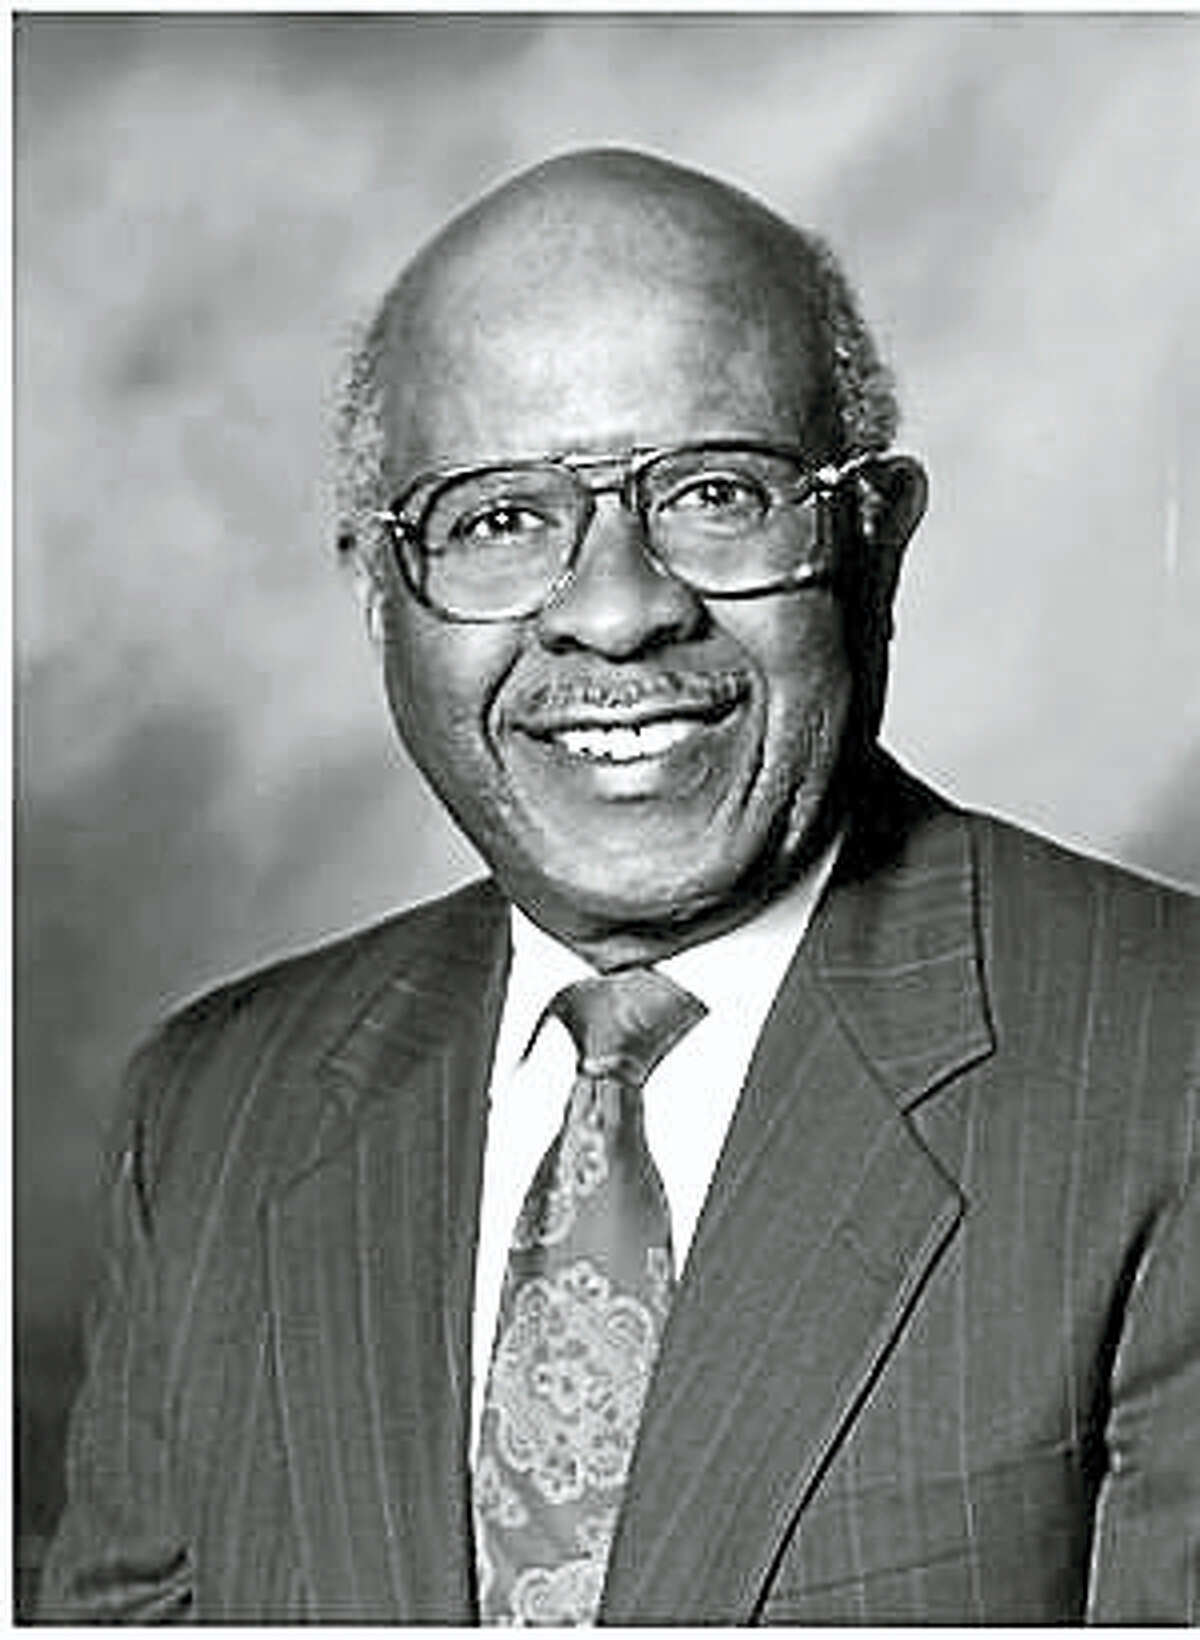 McRae was the first African American to chair the board of directors of Liberty Bank and founding director of the Liberty Bank Foundation.